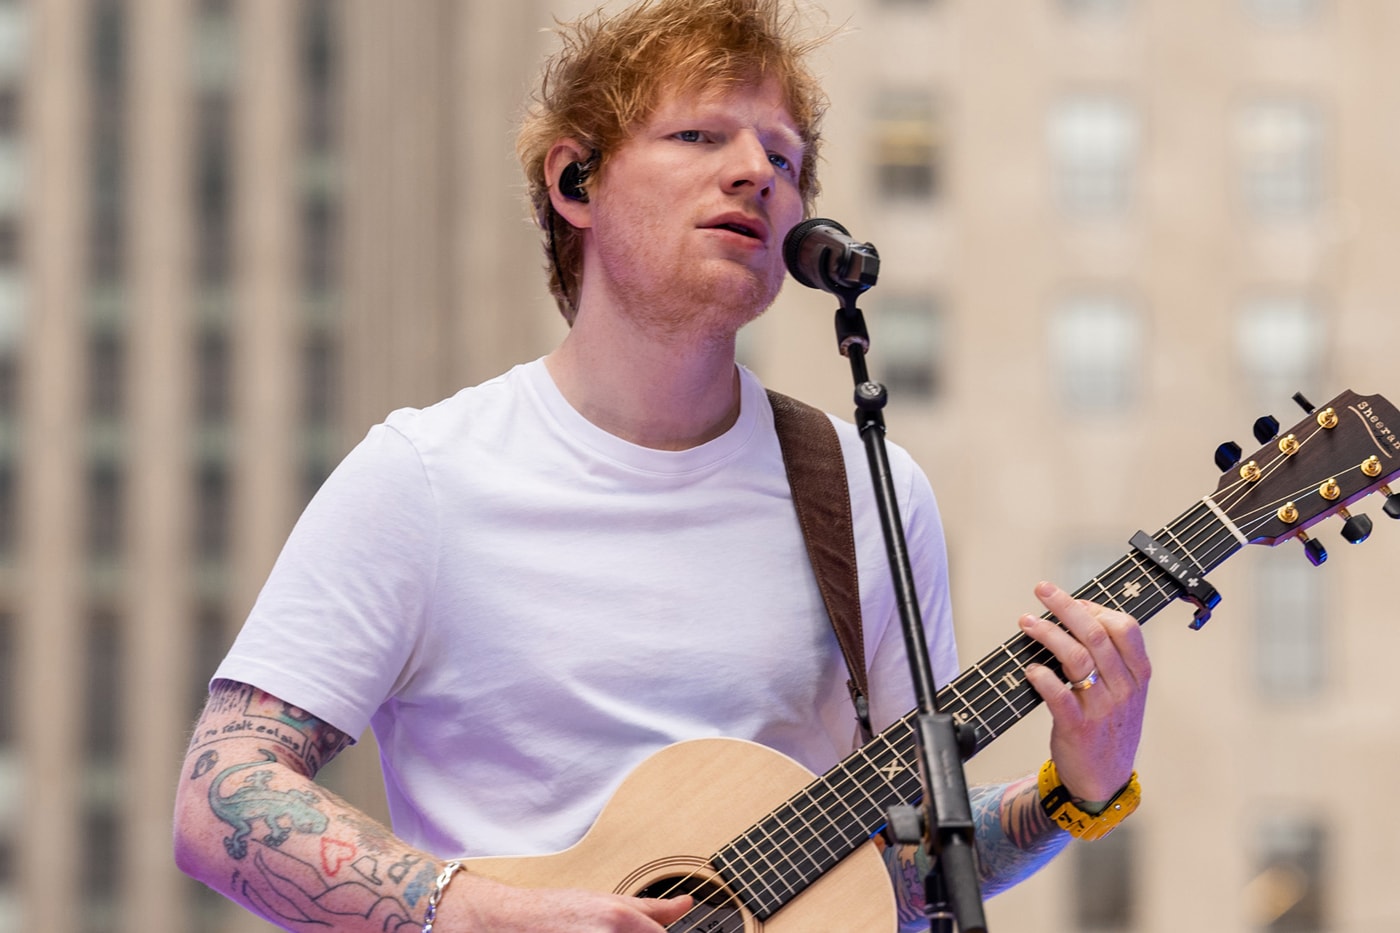 New Plaintiffs File Appeal Ed Sheeran thinking out loud Marvin Gaye Case